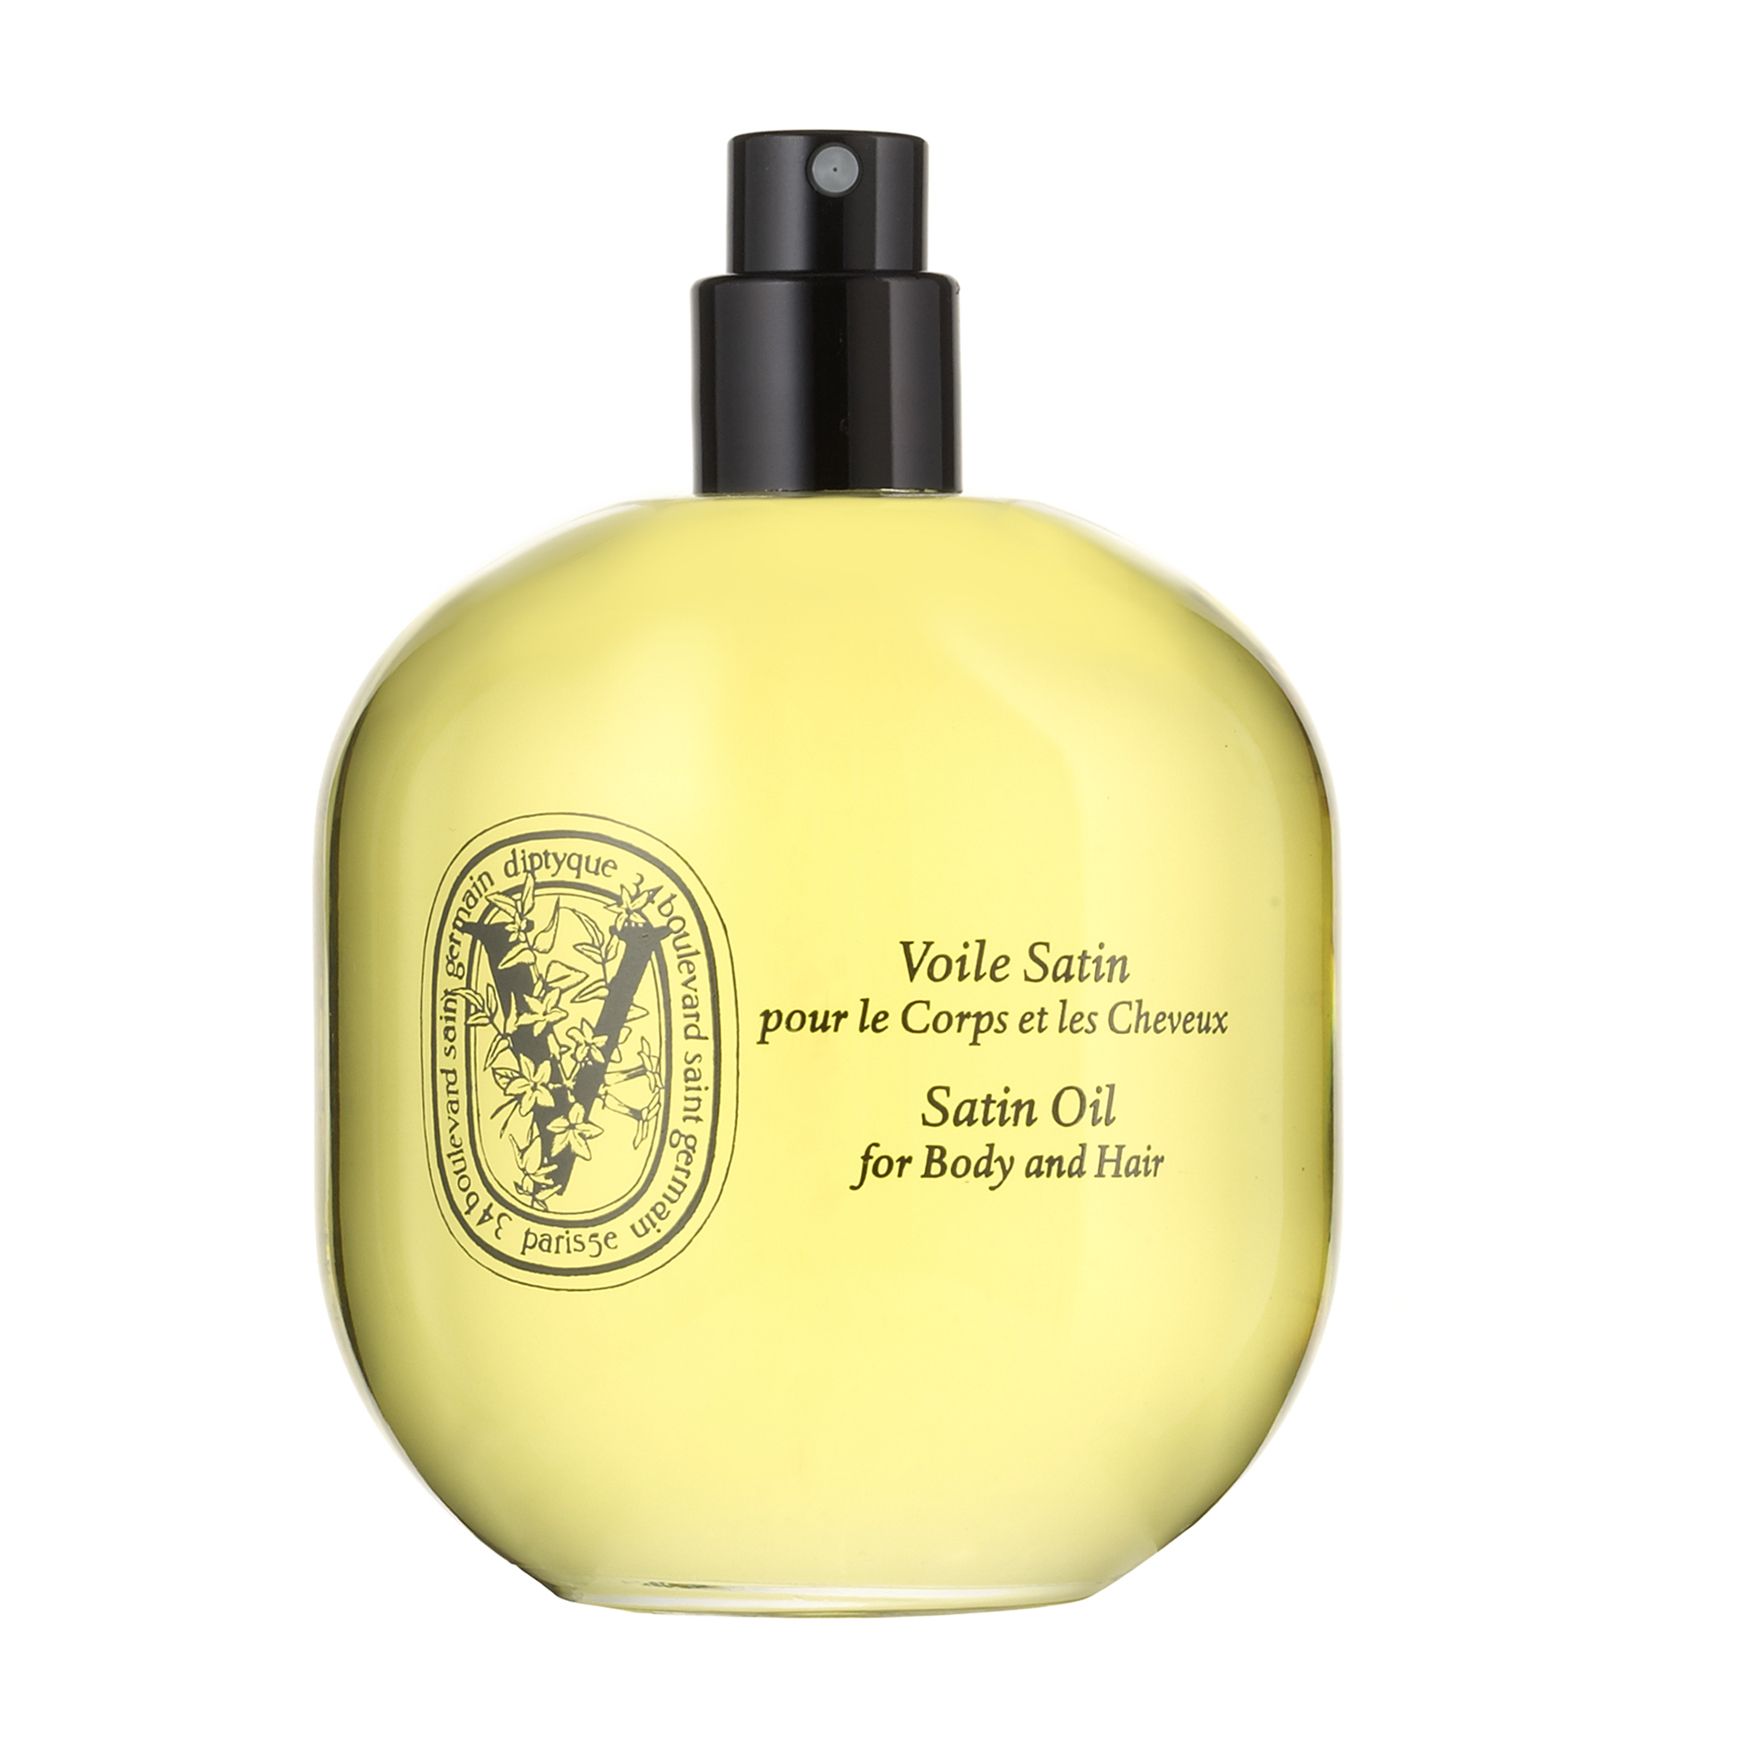 Satin Oil for Body and Hair 100ml | Space NK (EU)